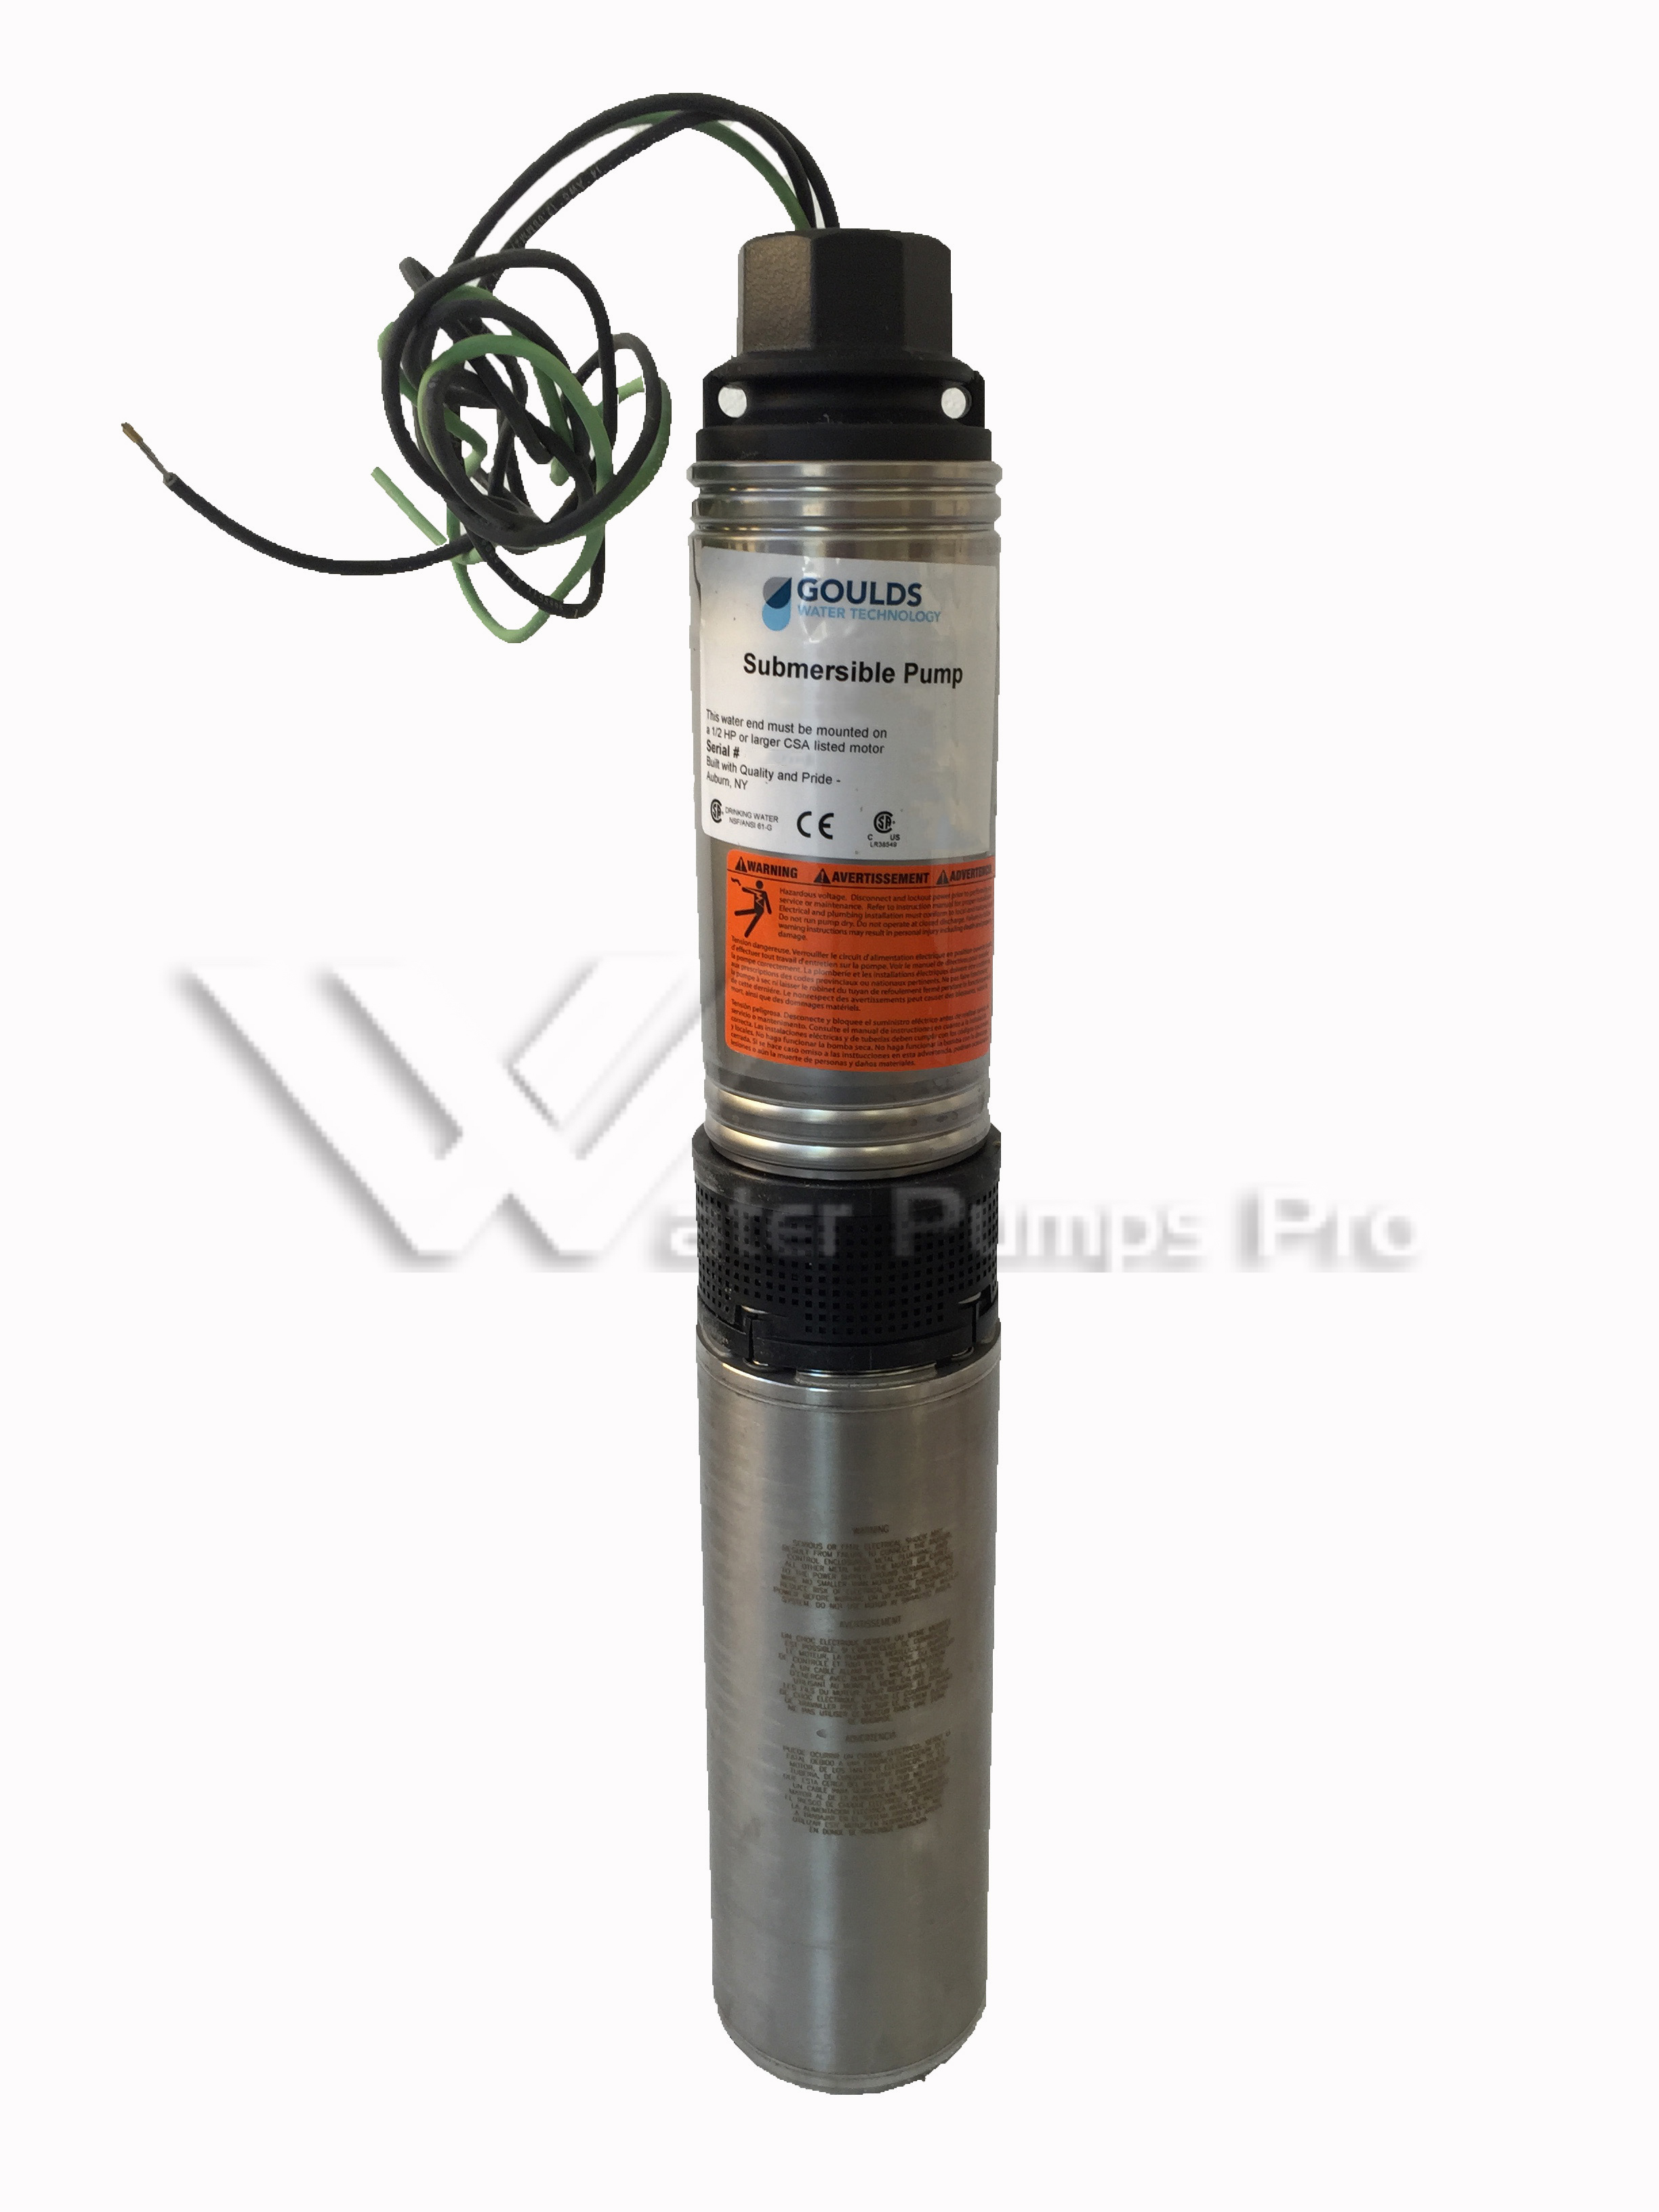 Goulds 10HS10422C Submersible Water Well Pump 1HP 230V 2Wire